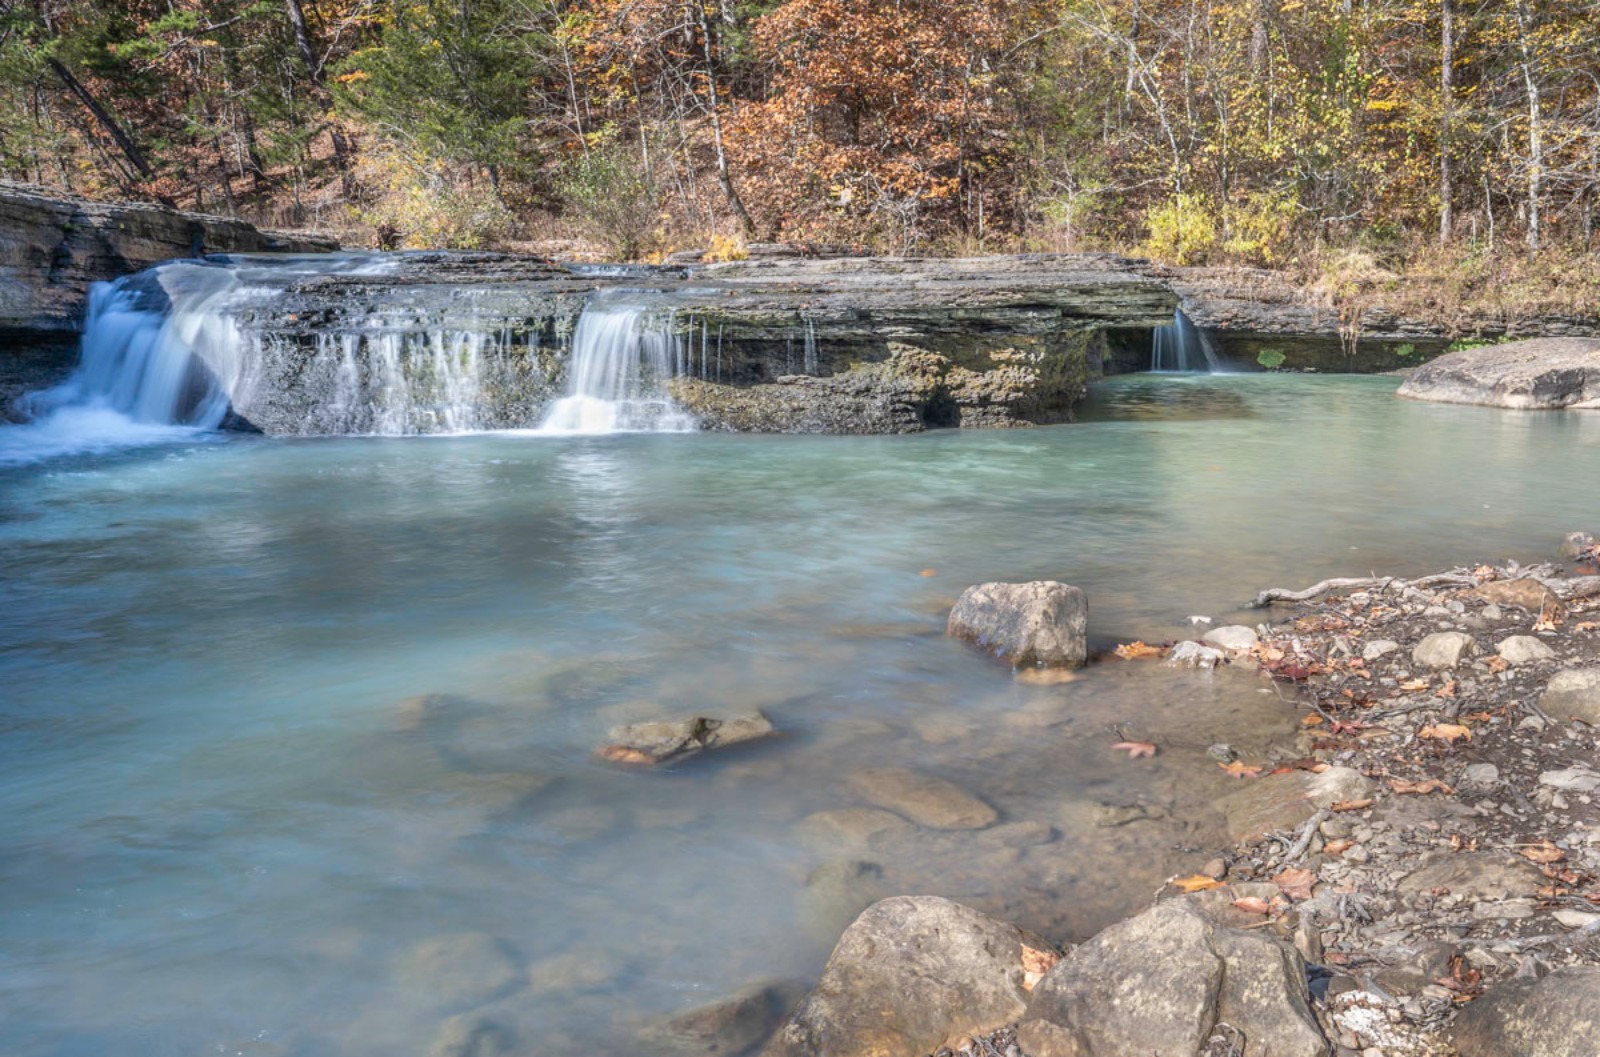 Haw Creek Falls, seen here in the drier fall season, is a great place to have a picnic and let kids splash around the creek. (Photo by Sony Hocklander)